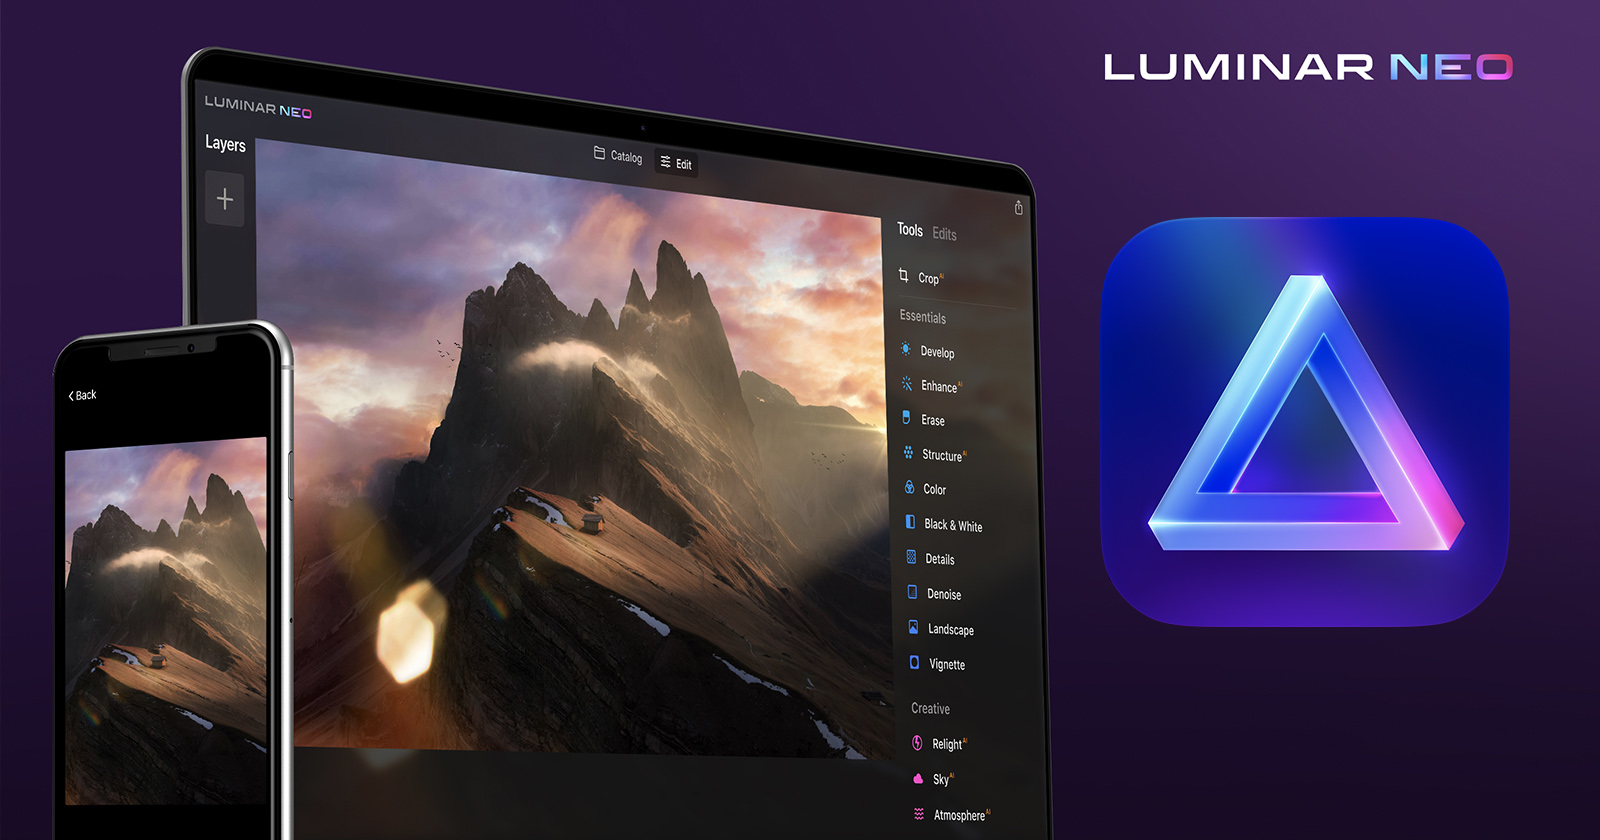 Luminar Neo 1.12.2.11818 download the new version